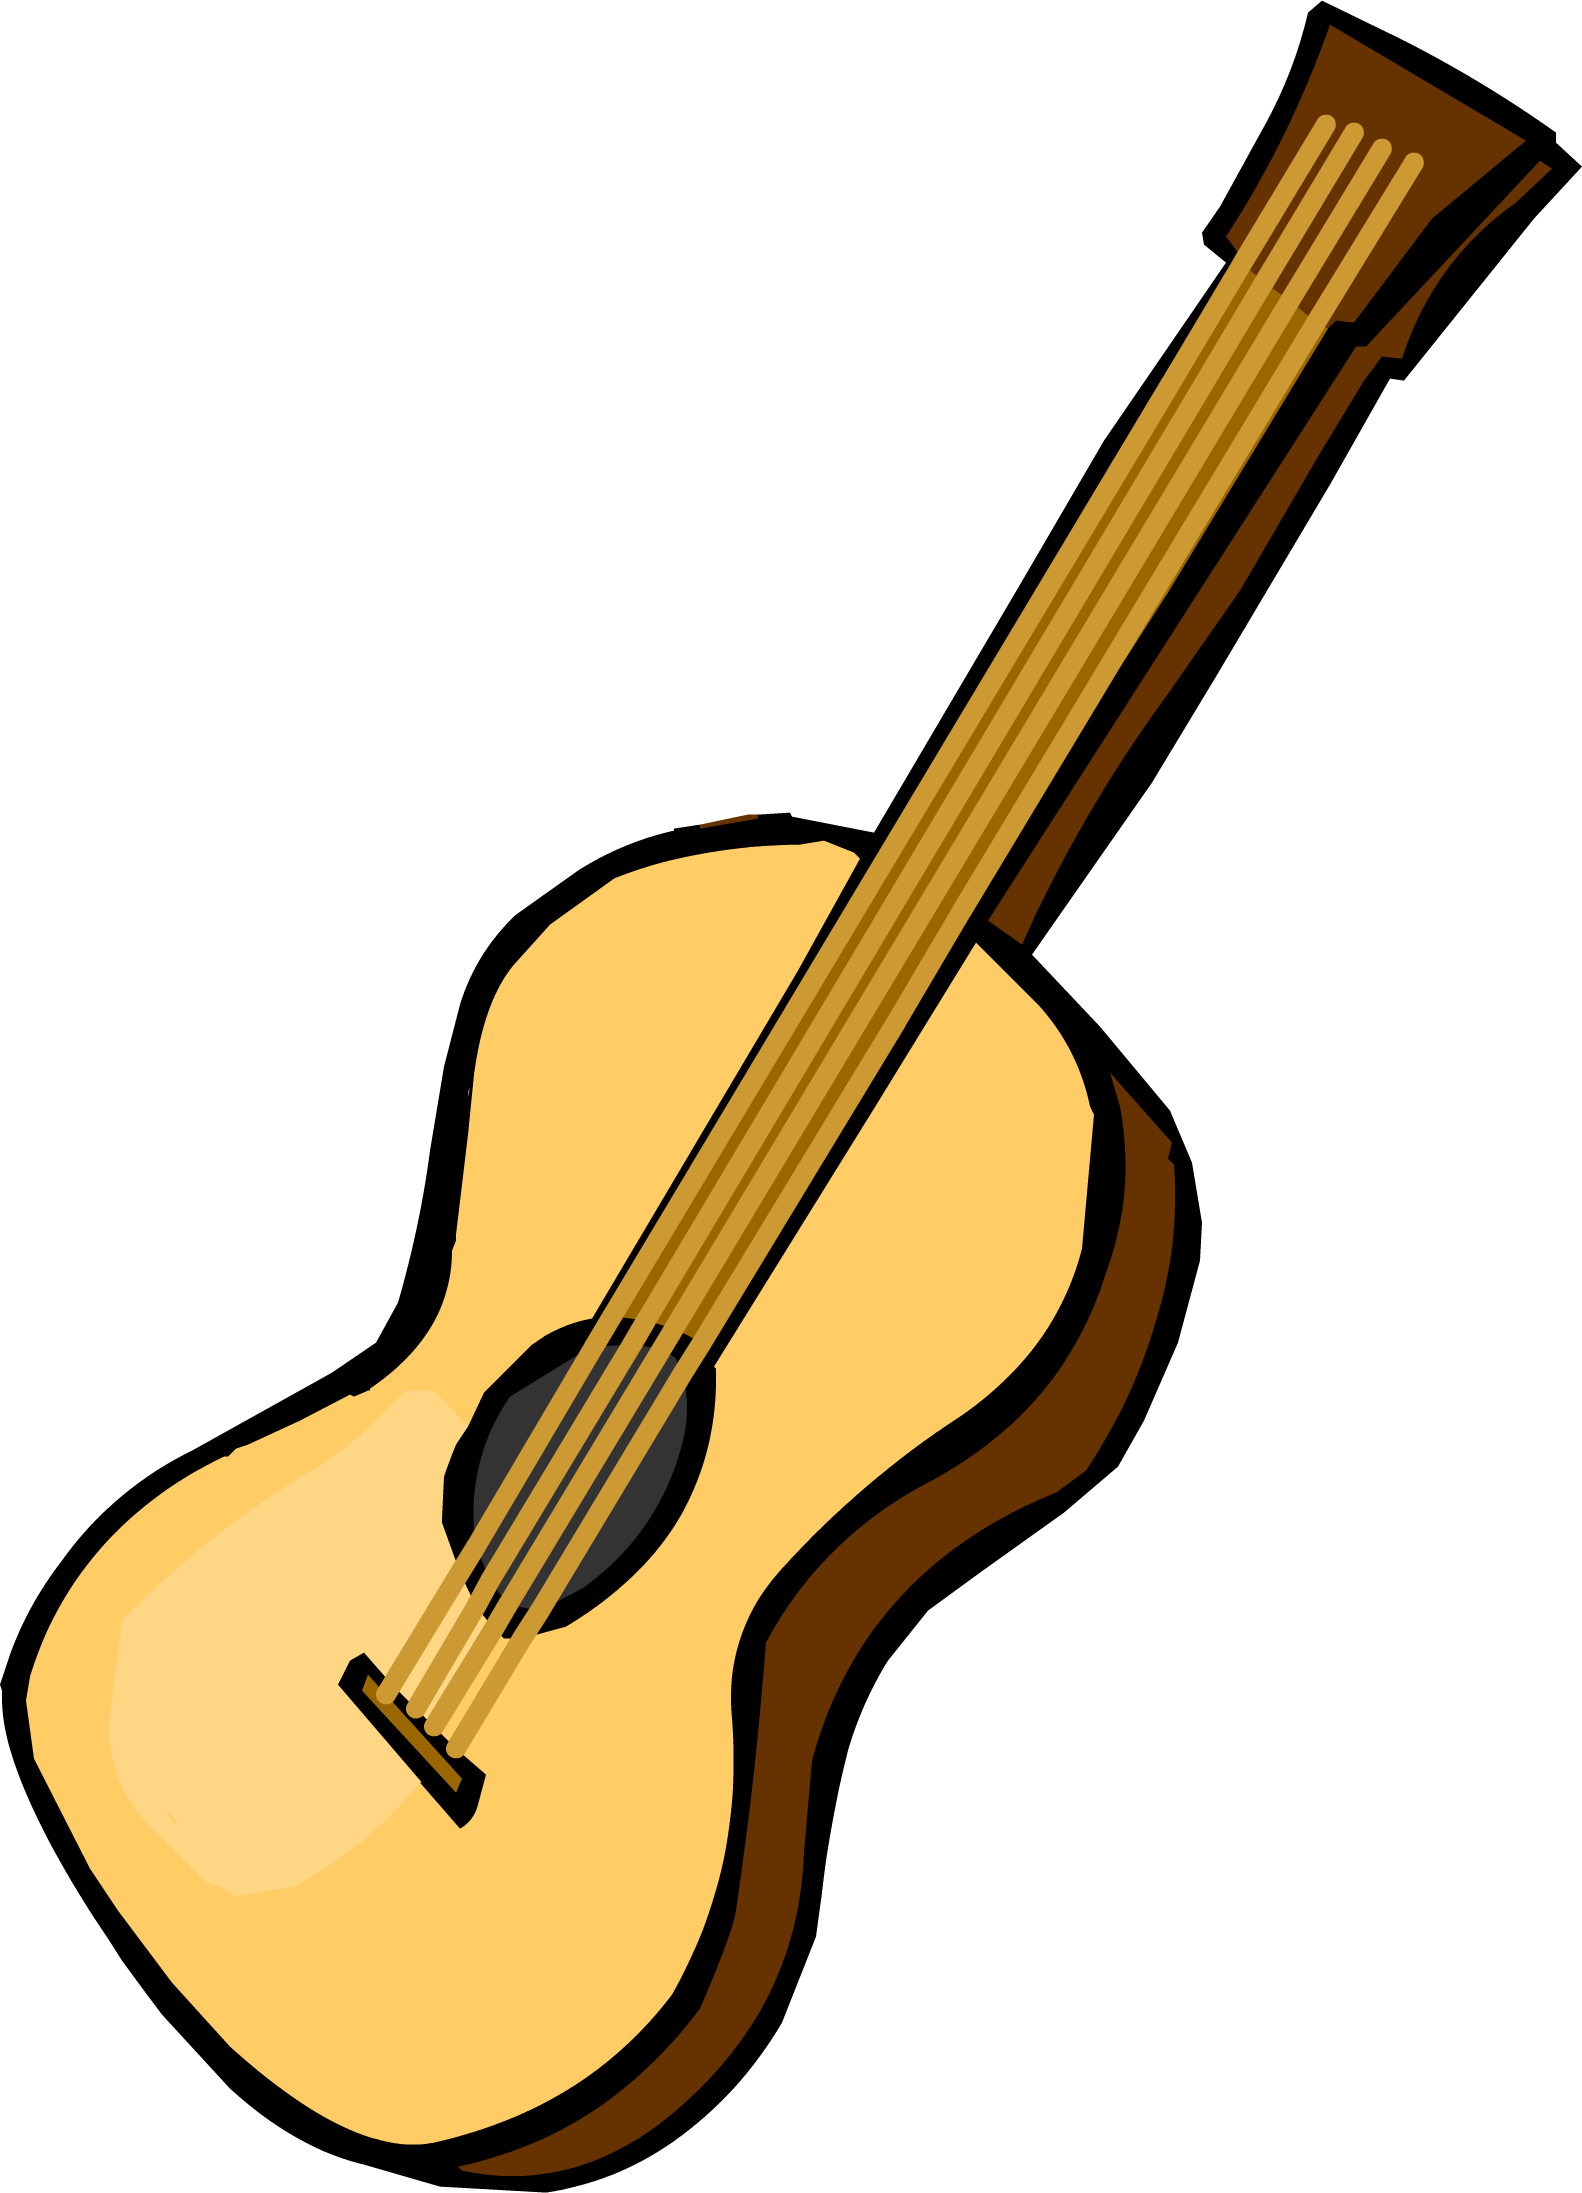 Musician clipart acoustic band. Guitar club penguin wiki